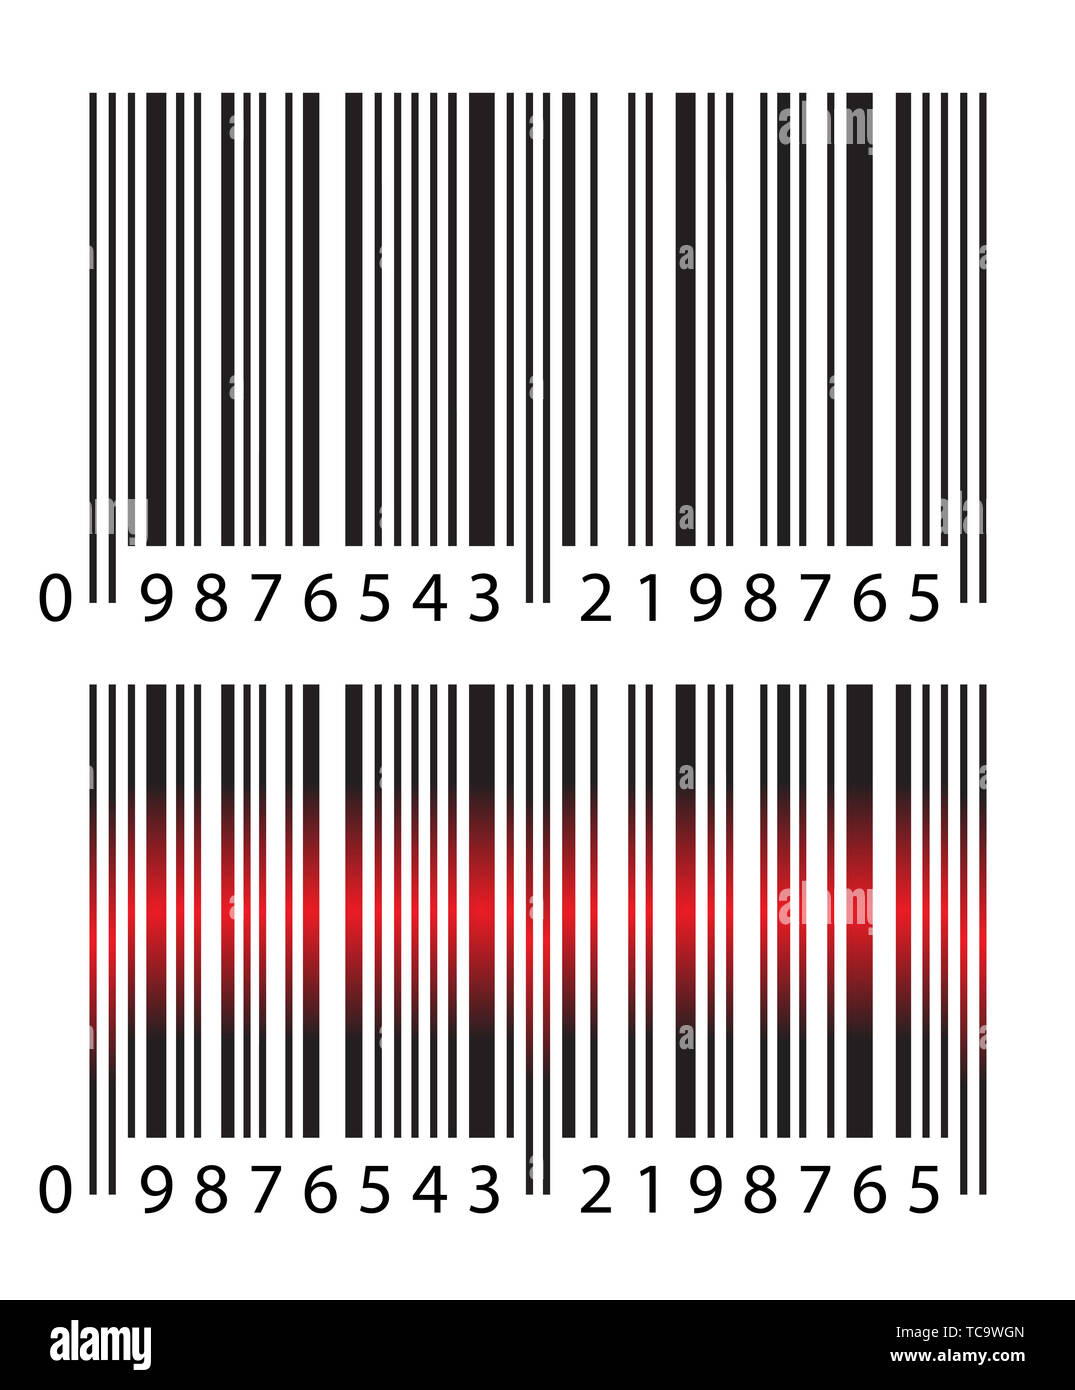 Modern Realistic Simple Barcode & Barcode With Red Laser Light on White  Background. Marketing, Internet Concept, Supermarket Buy, Mobile App Etc  Logo Stock Photo - Alamy